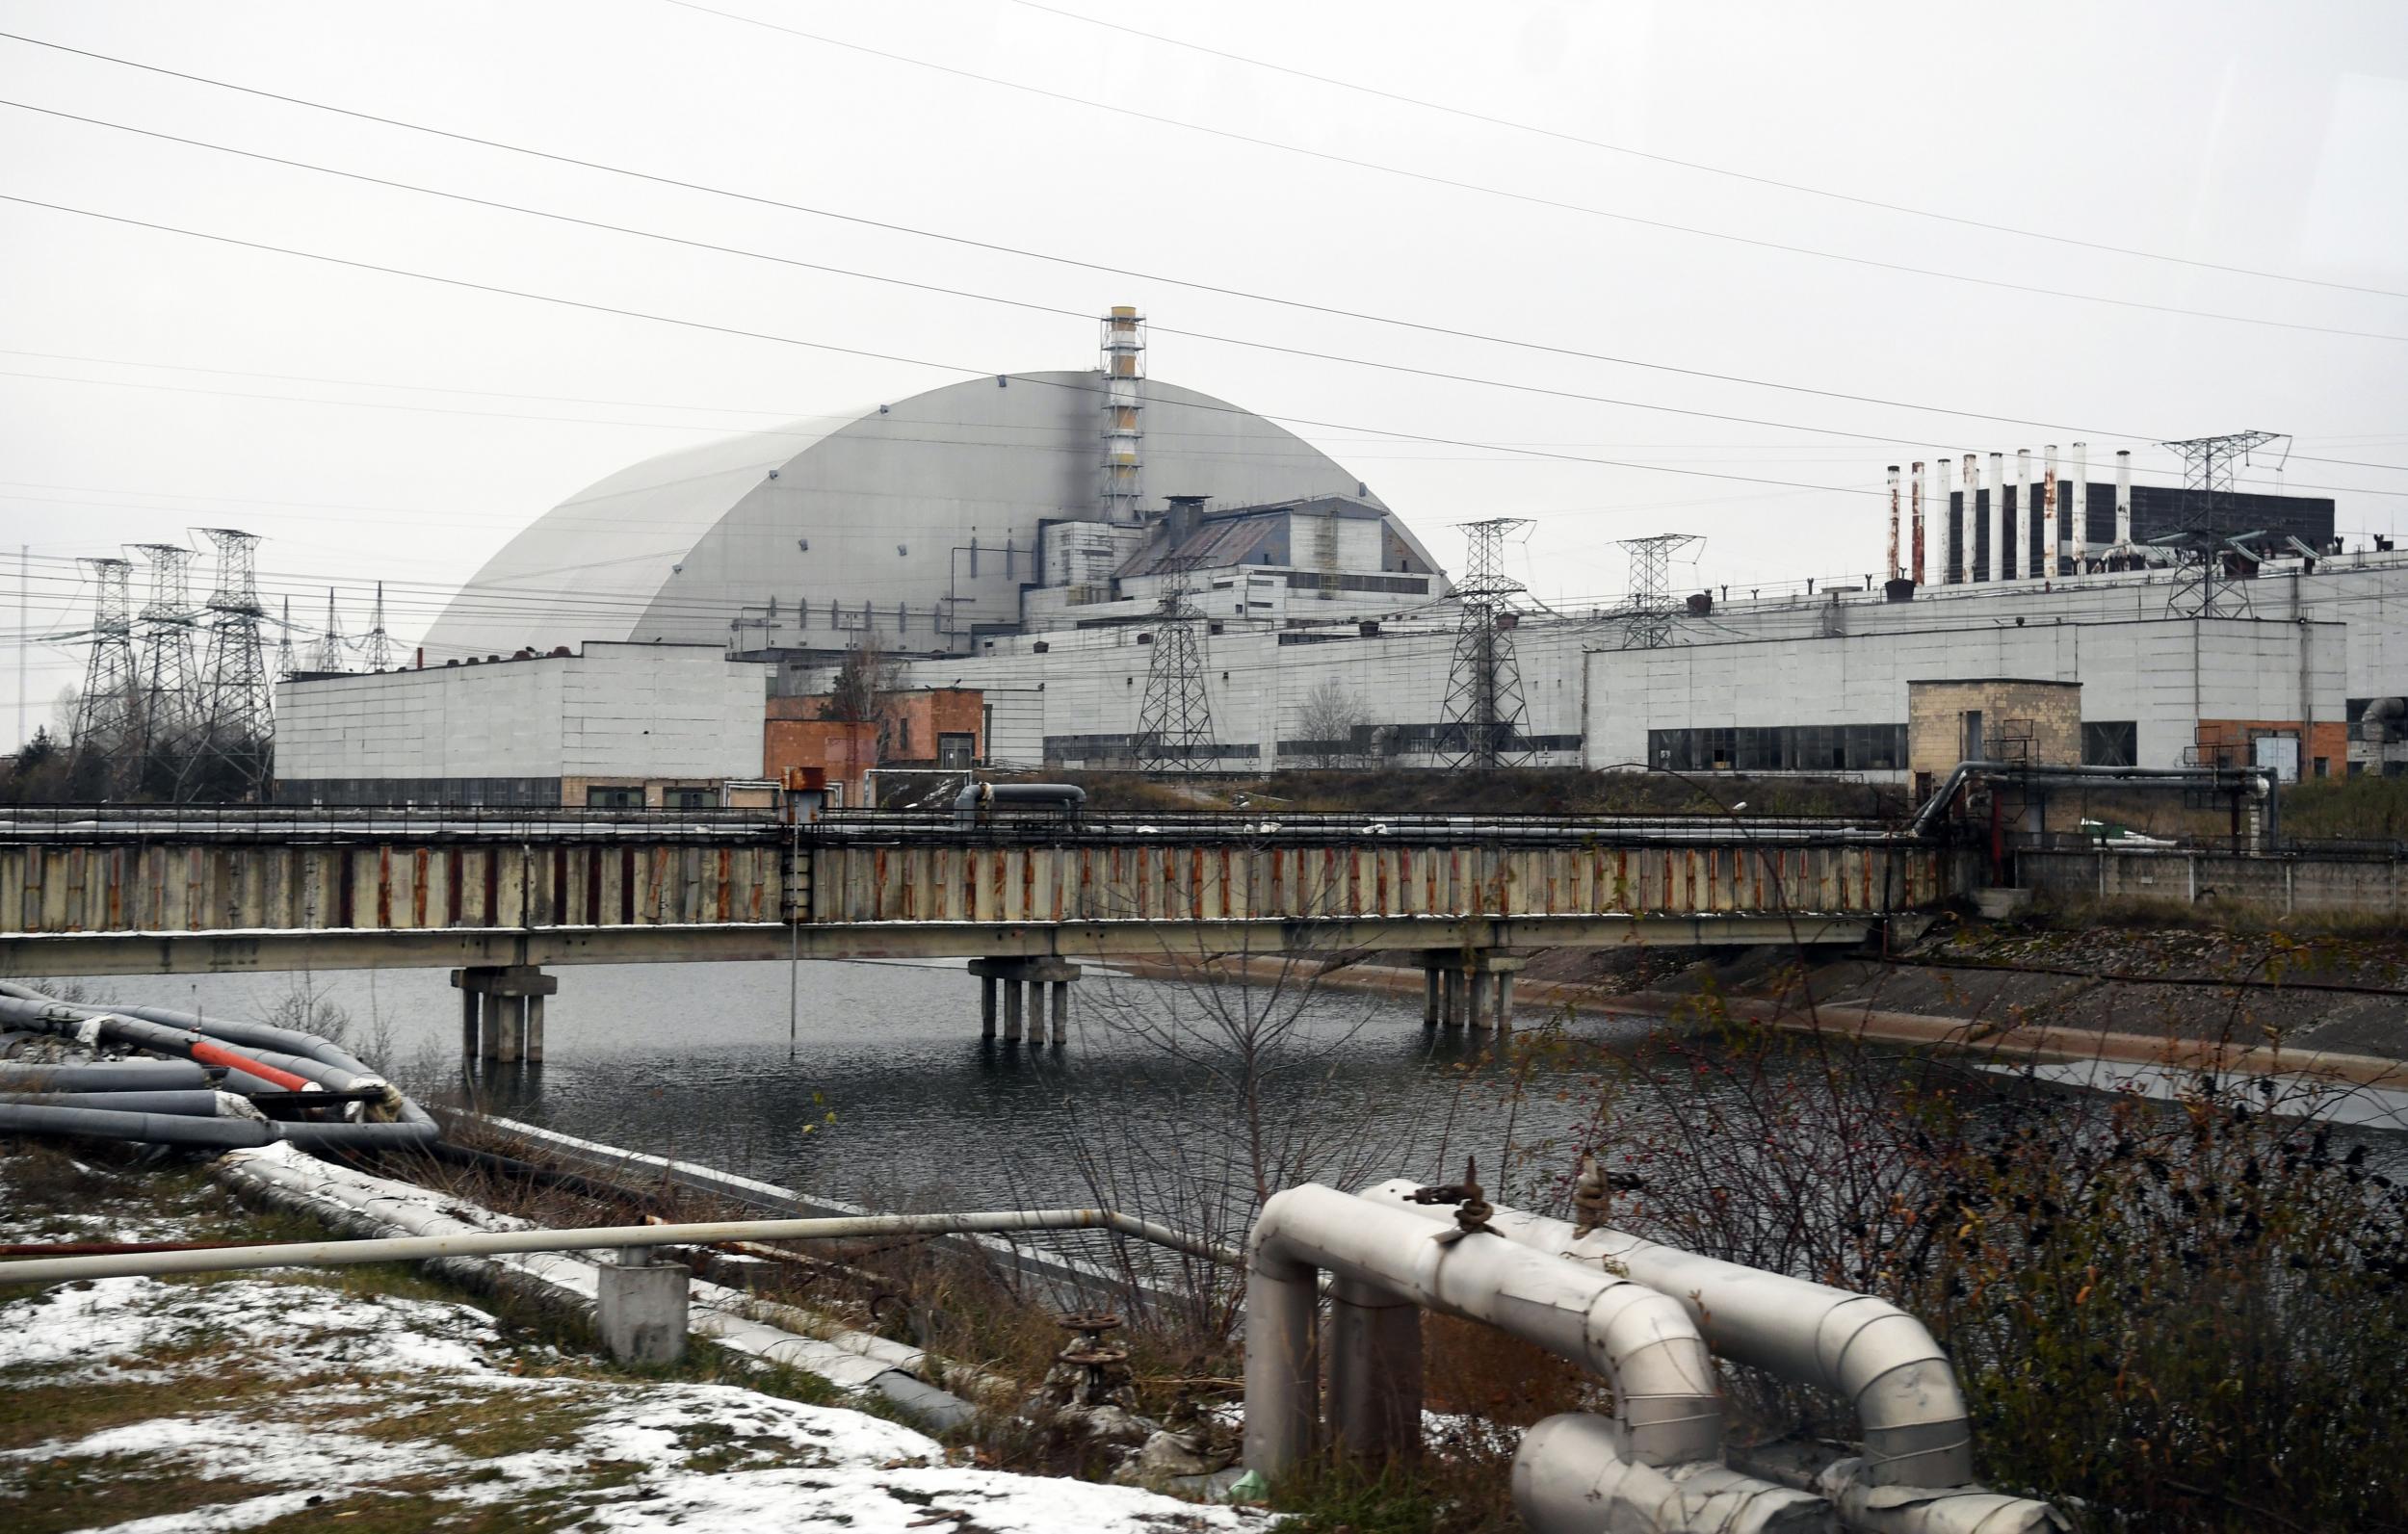 The New Safe Confinement sarcophagus covering the fourth block of the Chernobyl nuclear power plant in 2018